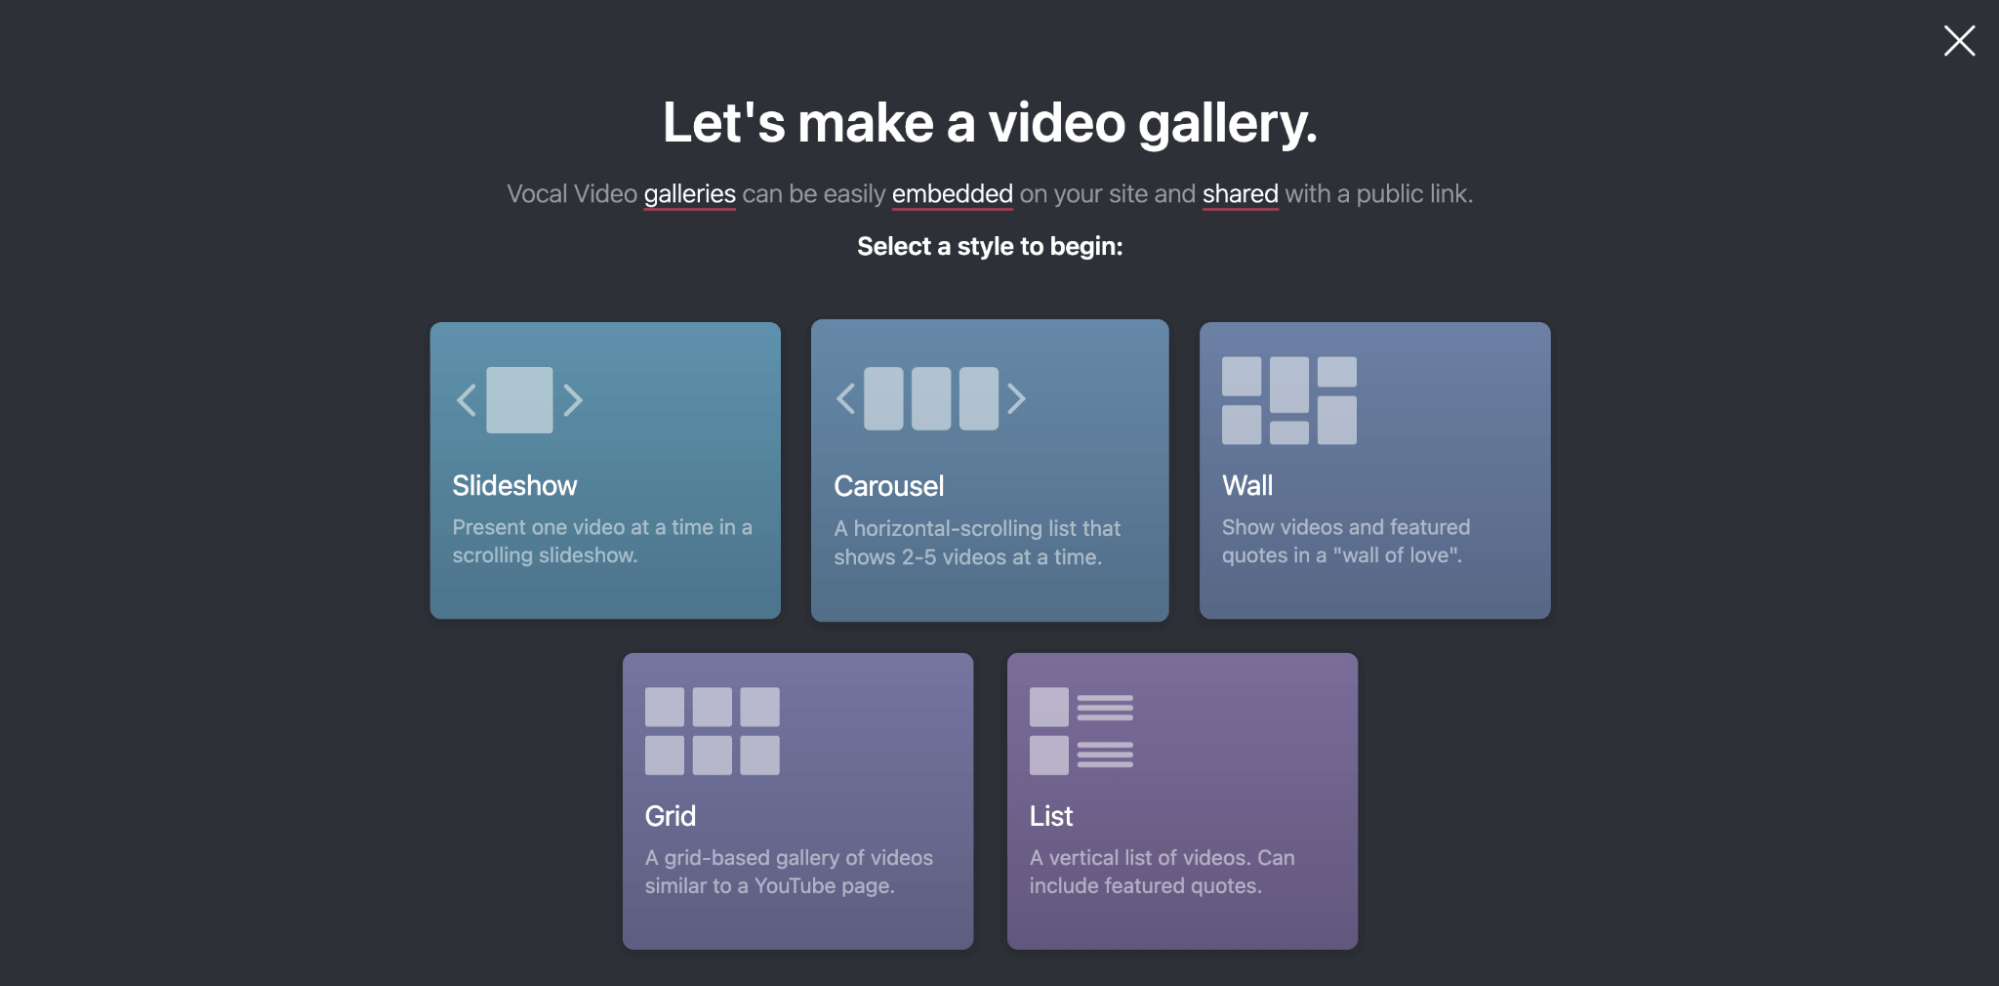 Let's make a video gallery. 